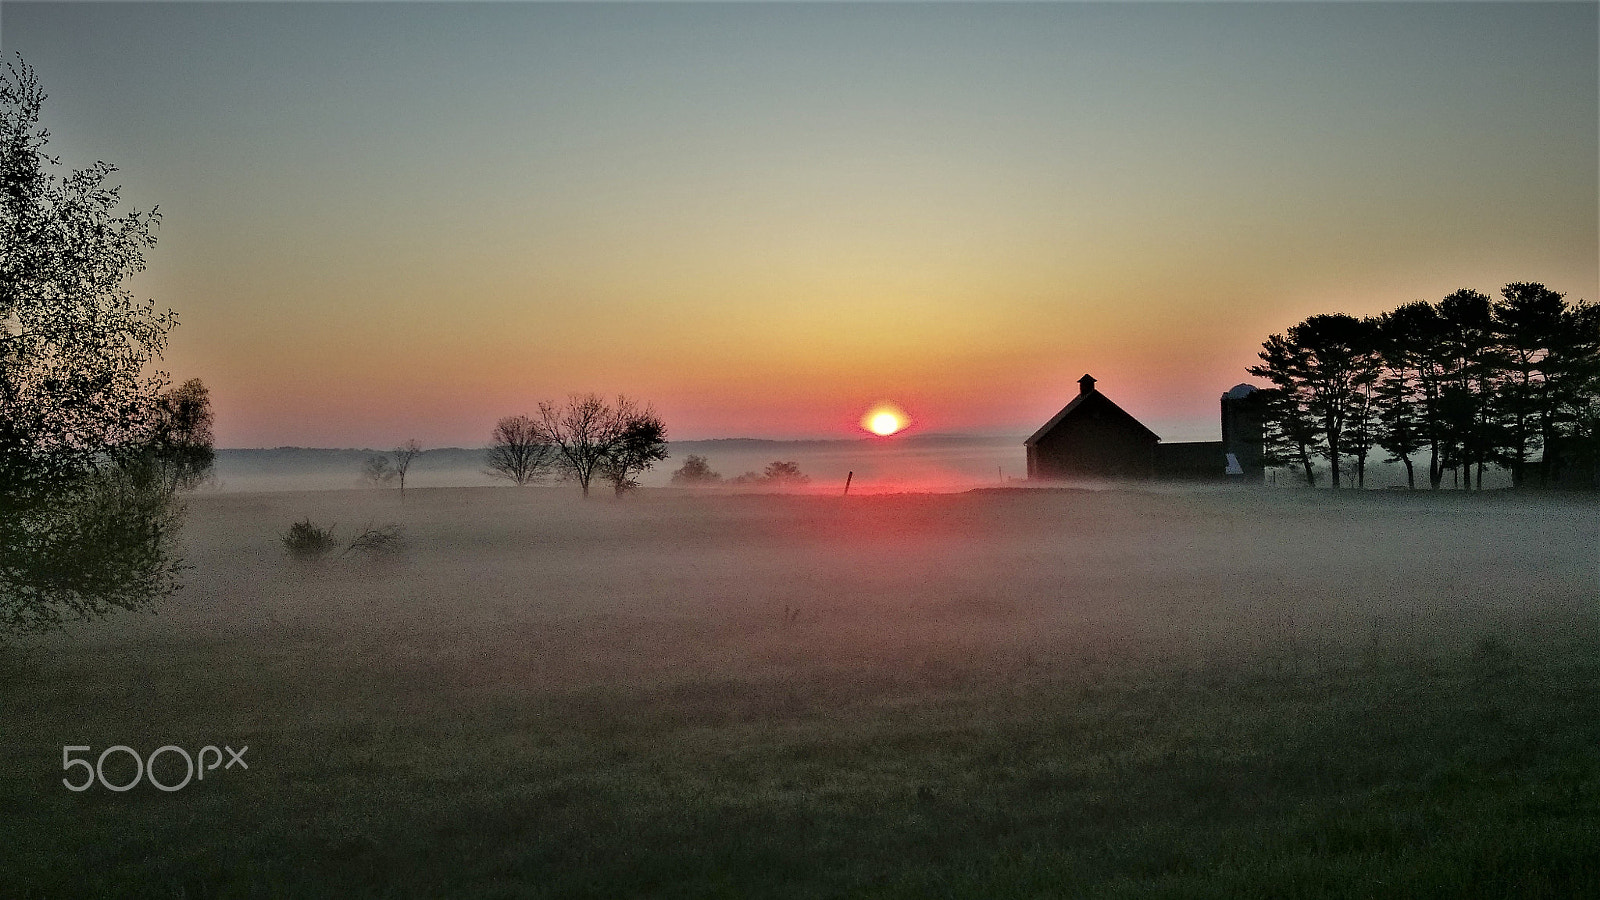 HTC ONE A9 sample photo. Sunrise over rose hill farm photography